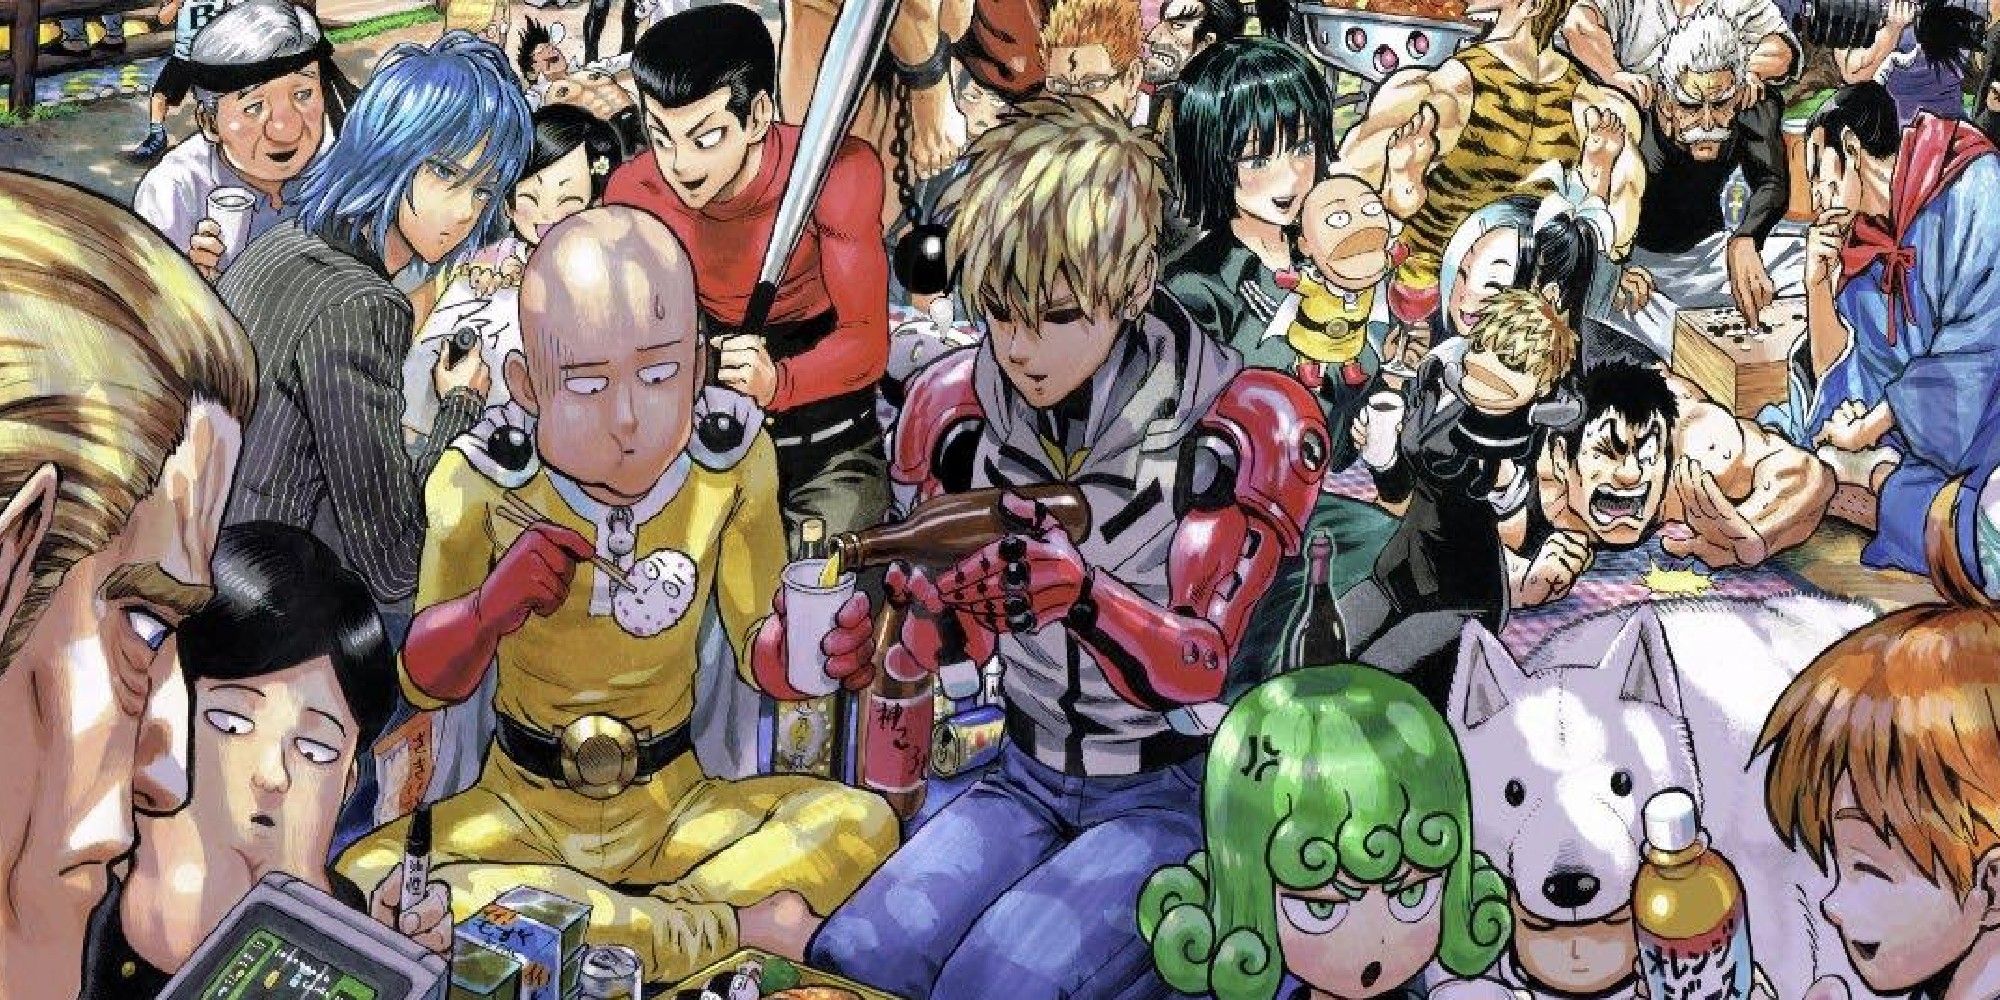 One-Punch man color spread showing the characters on a picnic